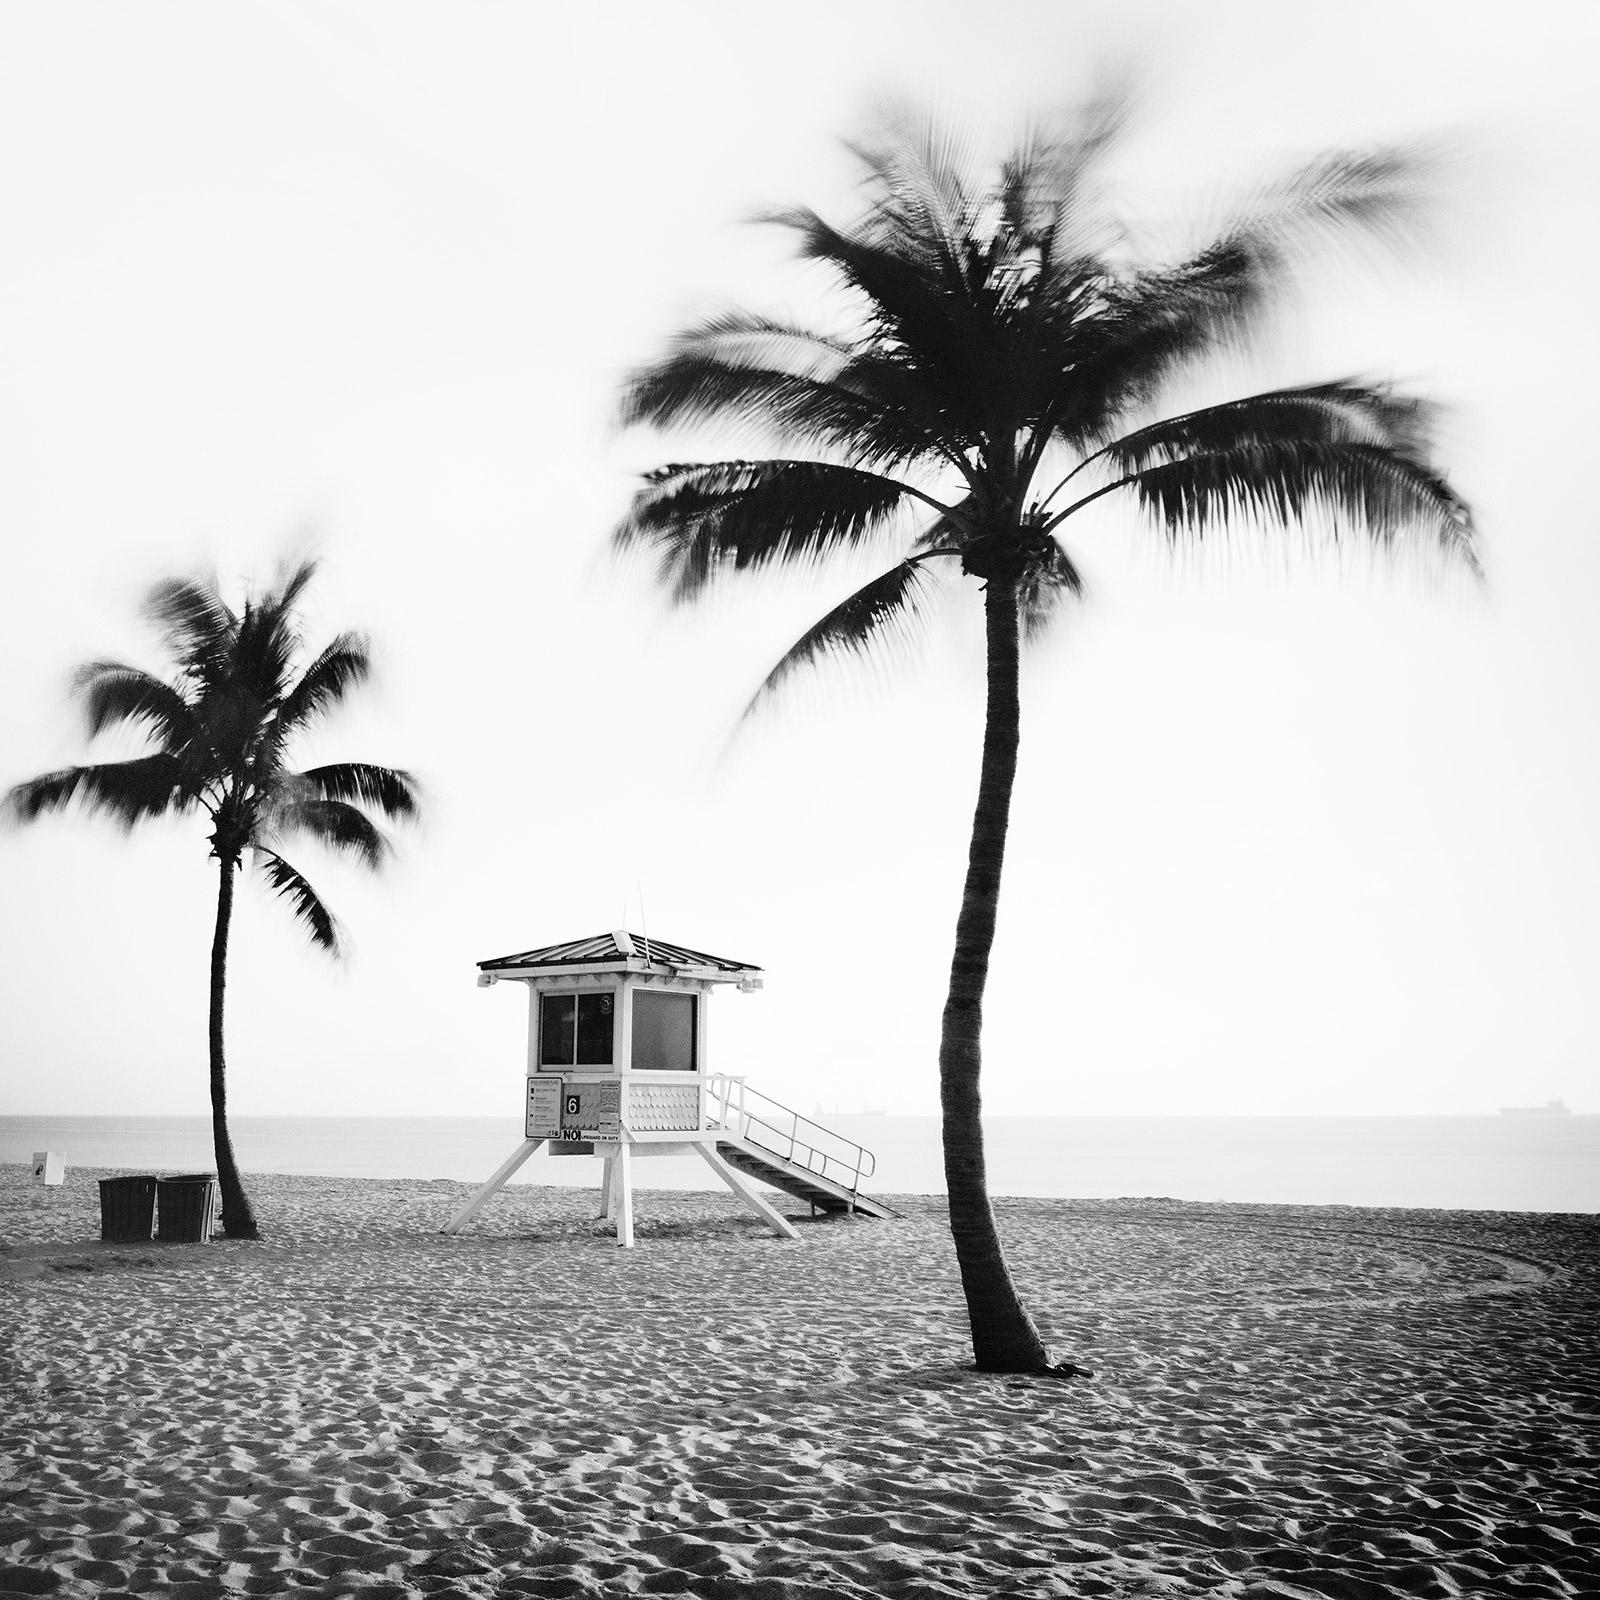 Gerald Berghammer Black and White Photograph - Fort Lauderdale Beach, Florida - Black and White Fine Art Landscape Photography